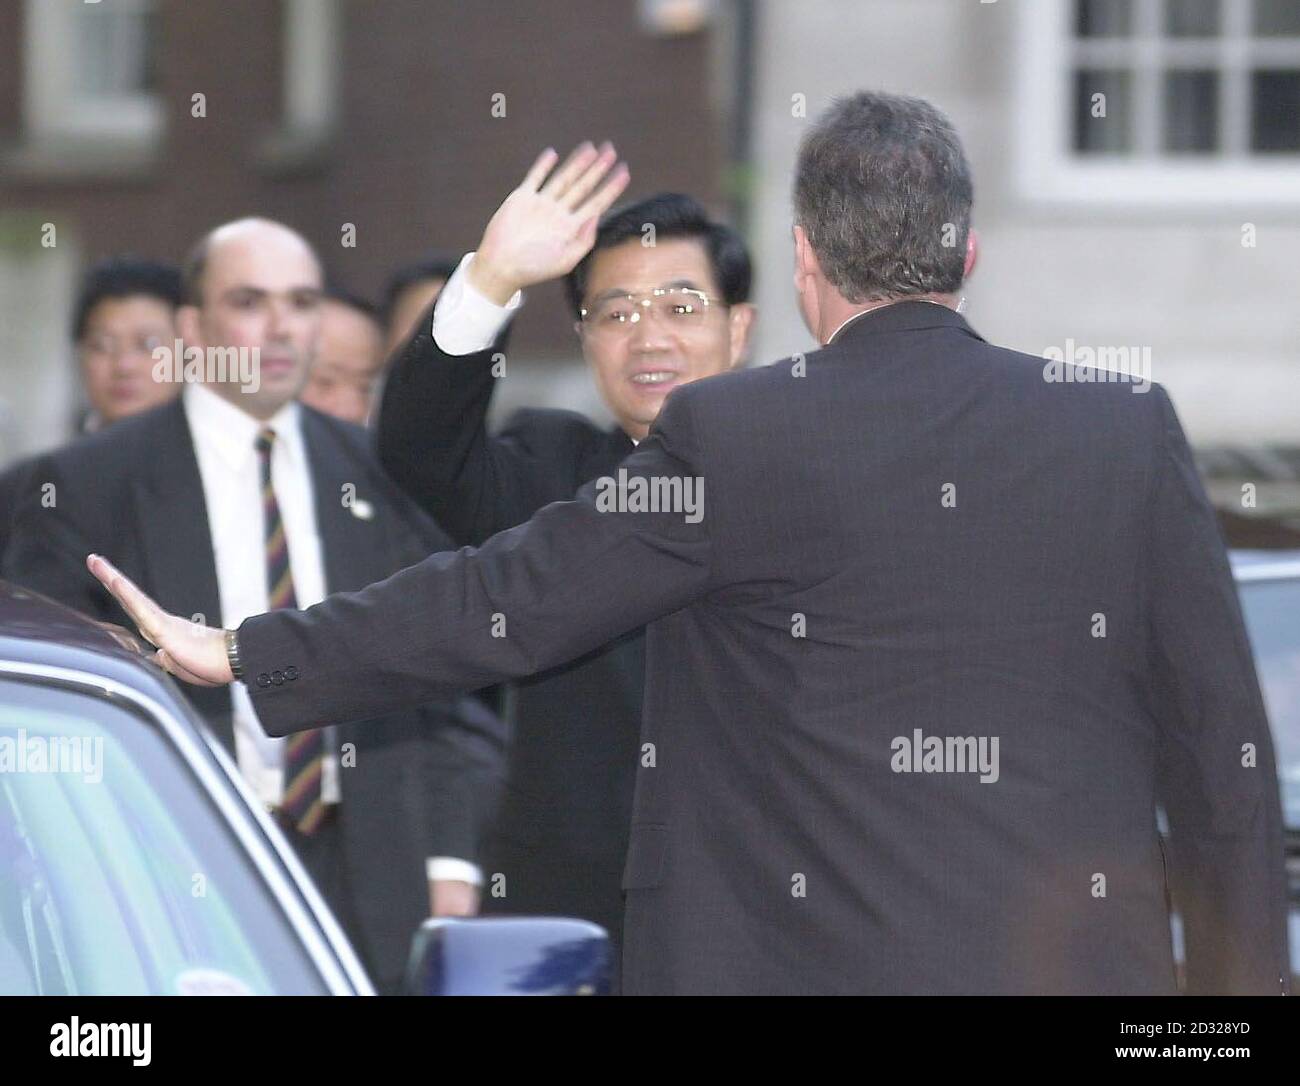 Hu Jintao, the vice-president of China, waves as noisy protesters give him a vocal reception as he arrives in Britain for a five-day state visit.   *...Hu Jintao, tipped as a future Chinese leader, heard boos and cat-calls from Free Tibet and pro-democracy demonstrators while arriving at London's Dorchester Hotel at the start of his five-day visit. The demonstrators were herded into a side street, away from the front of the hotel, but there was no attempt by the police to keep them out of the visiting statesman's view or to pull down banners critical of the Chinese government - as happened whe Stock Photo